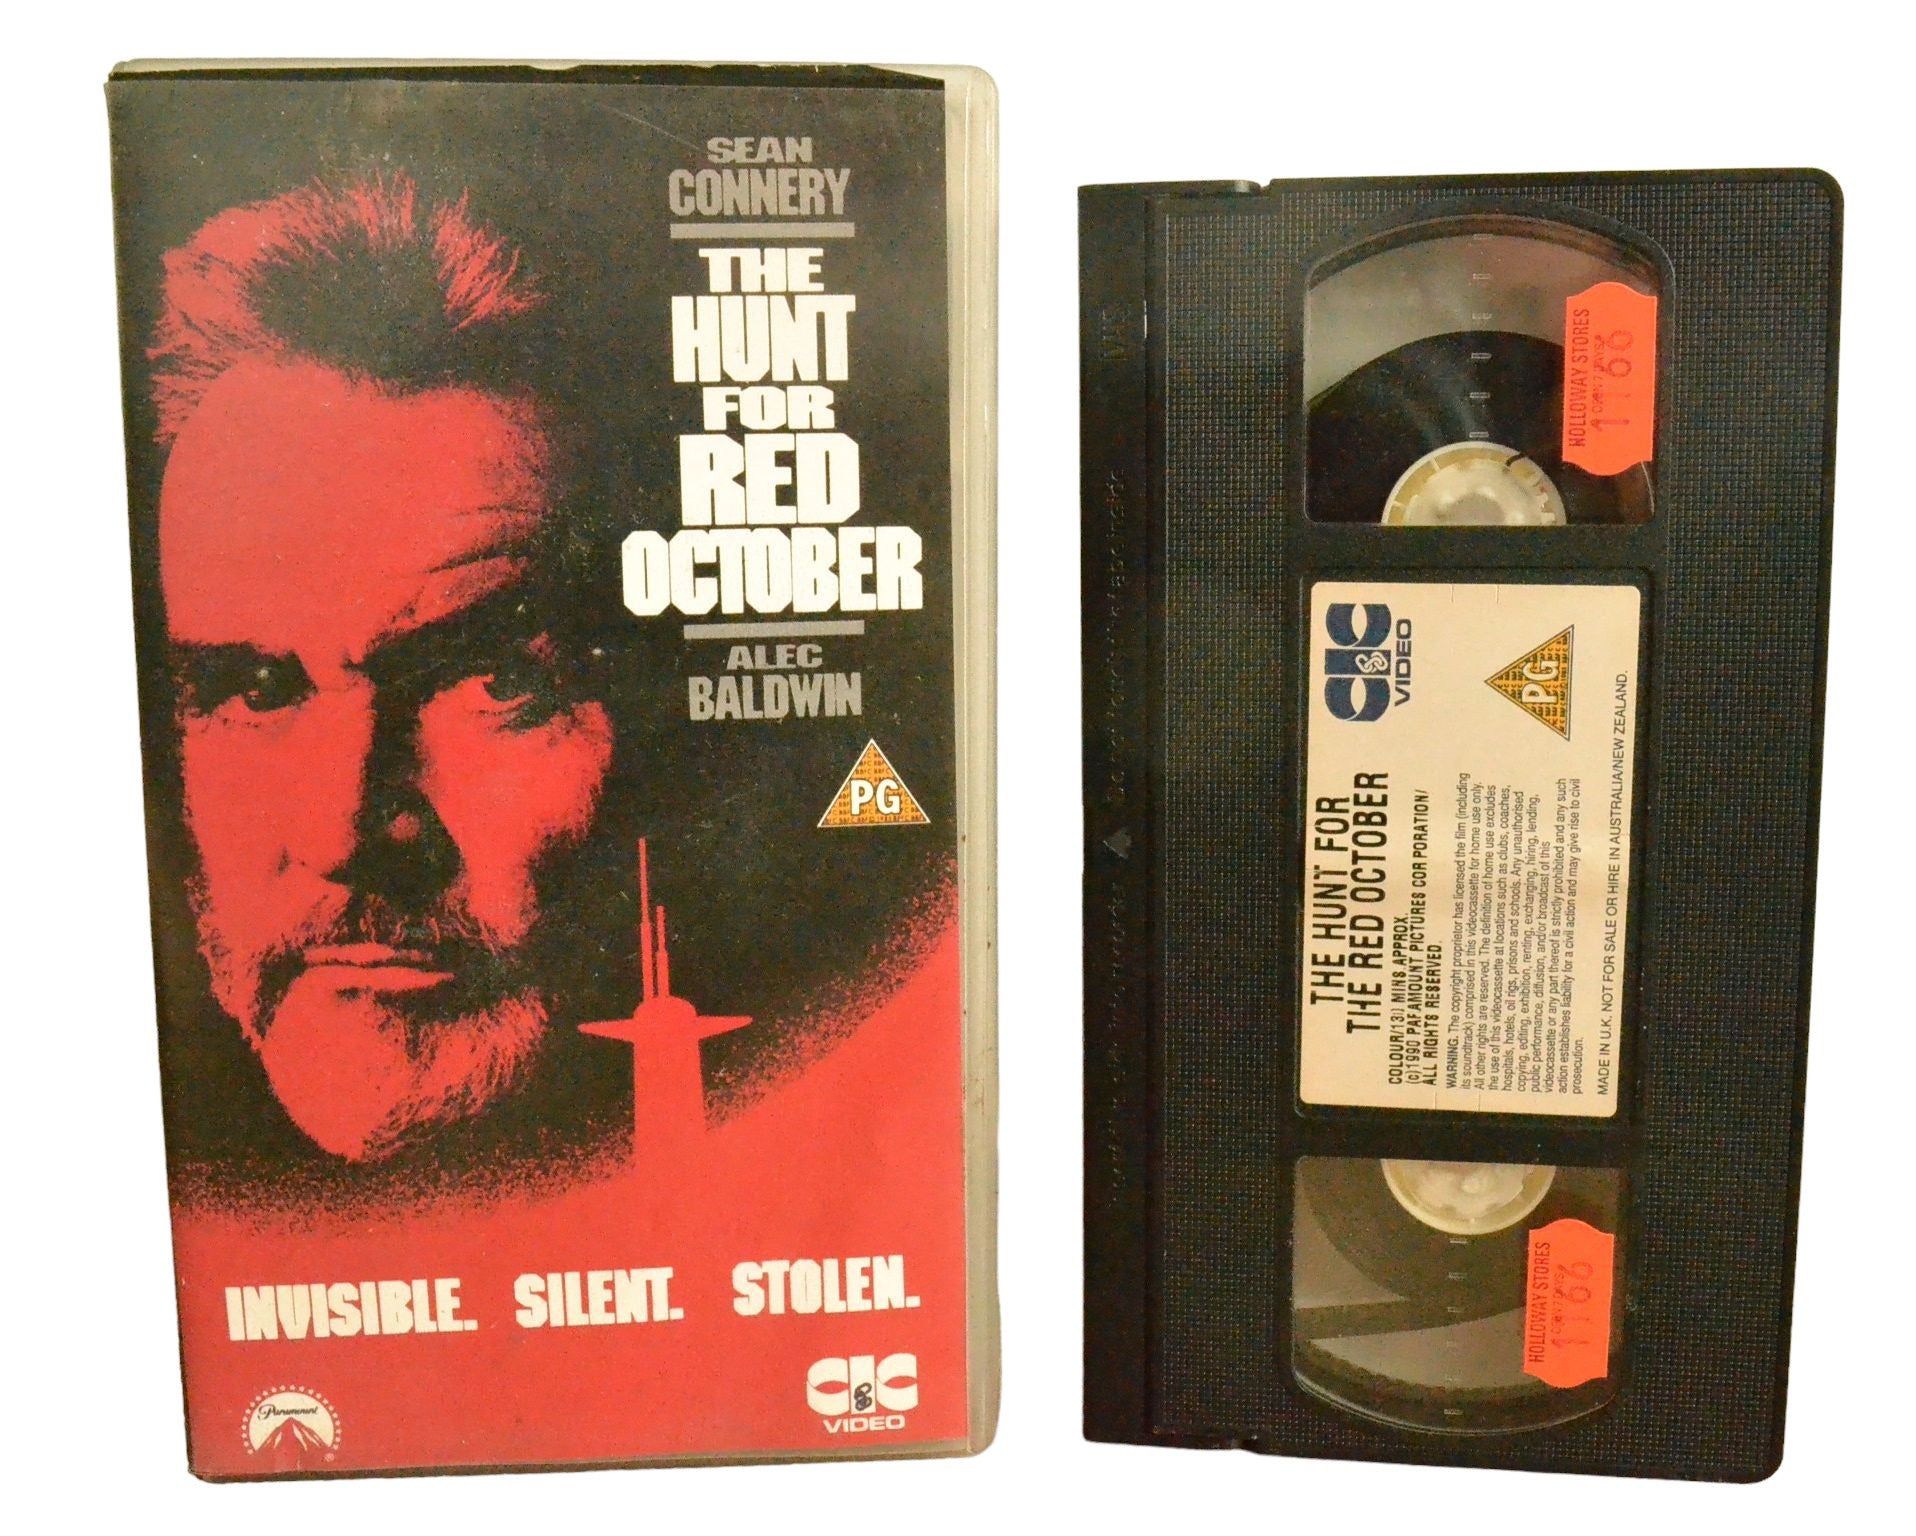 The Hunt For Red October - Sean Connery - CIC Video - VHR2406 - Action - Pal - VHS-